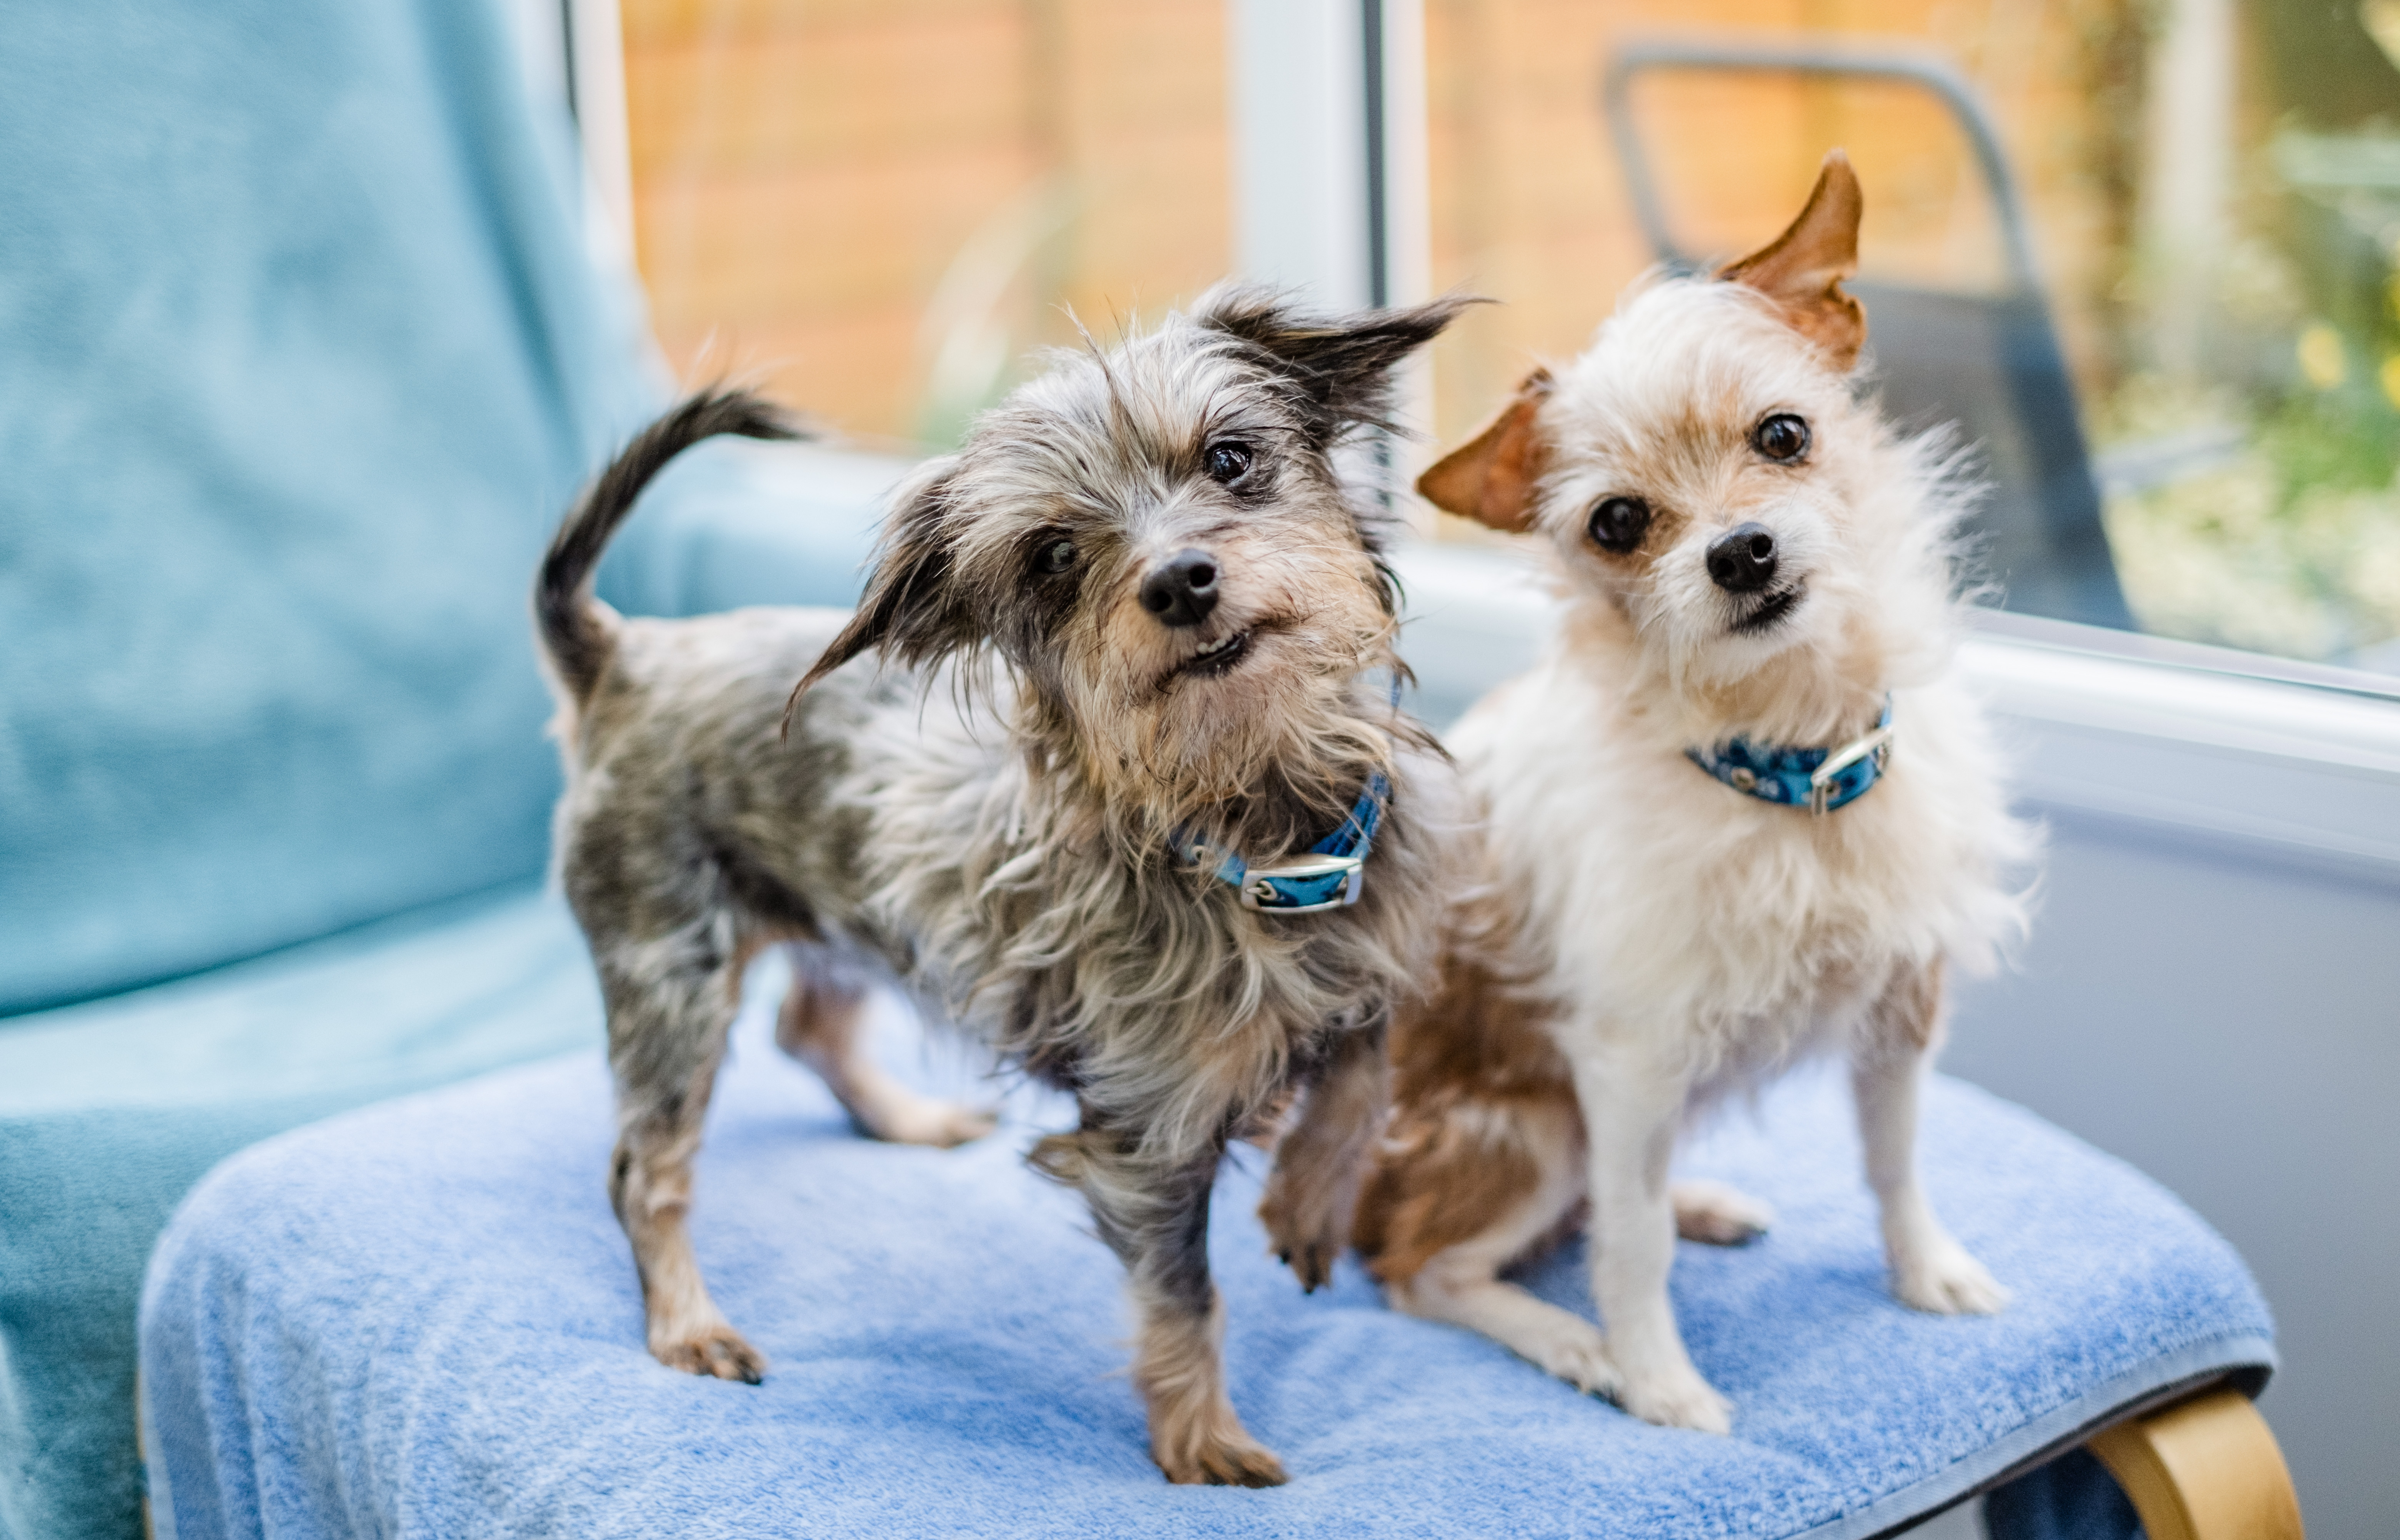 Dogs Moana, a Yorkshire terrier and dachshund cross, and Tinkerbell, a jack russell and Chihuahua cross, stand next to each other on the footstool of a chair. They both look directly towards the camera,